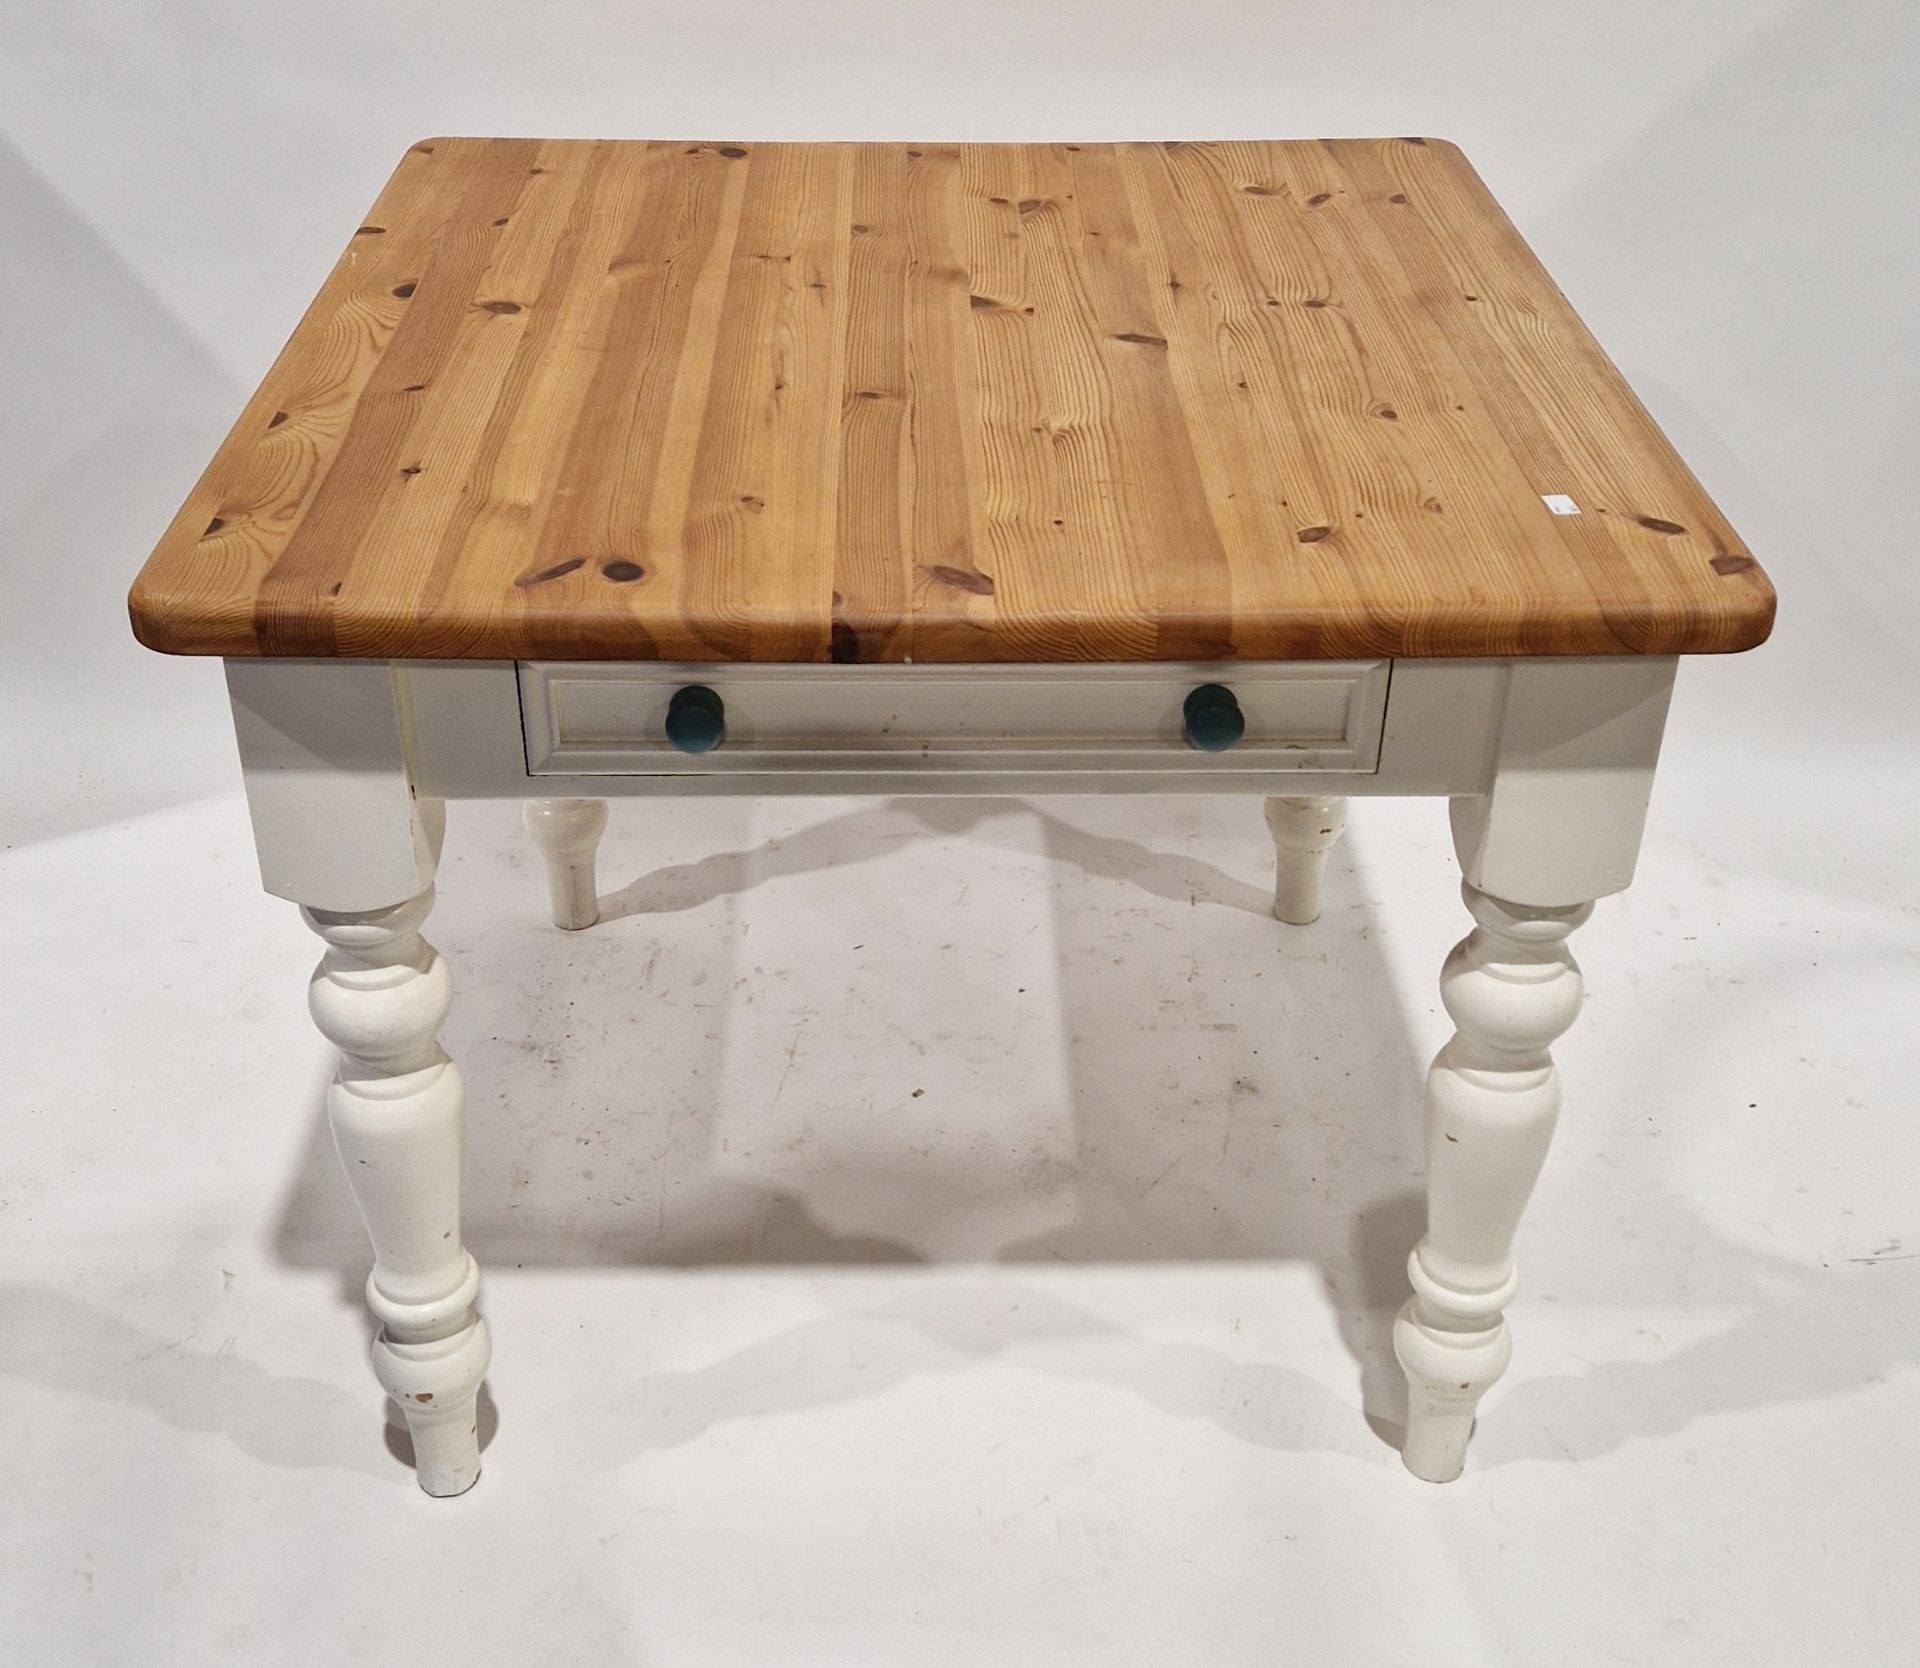 20th century pine breakfast table with white painted legs, 76cm high x 91cm wide x 92cm deep